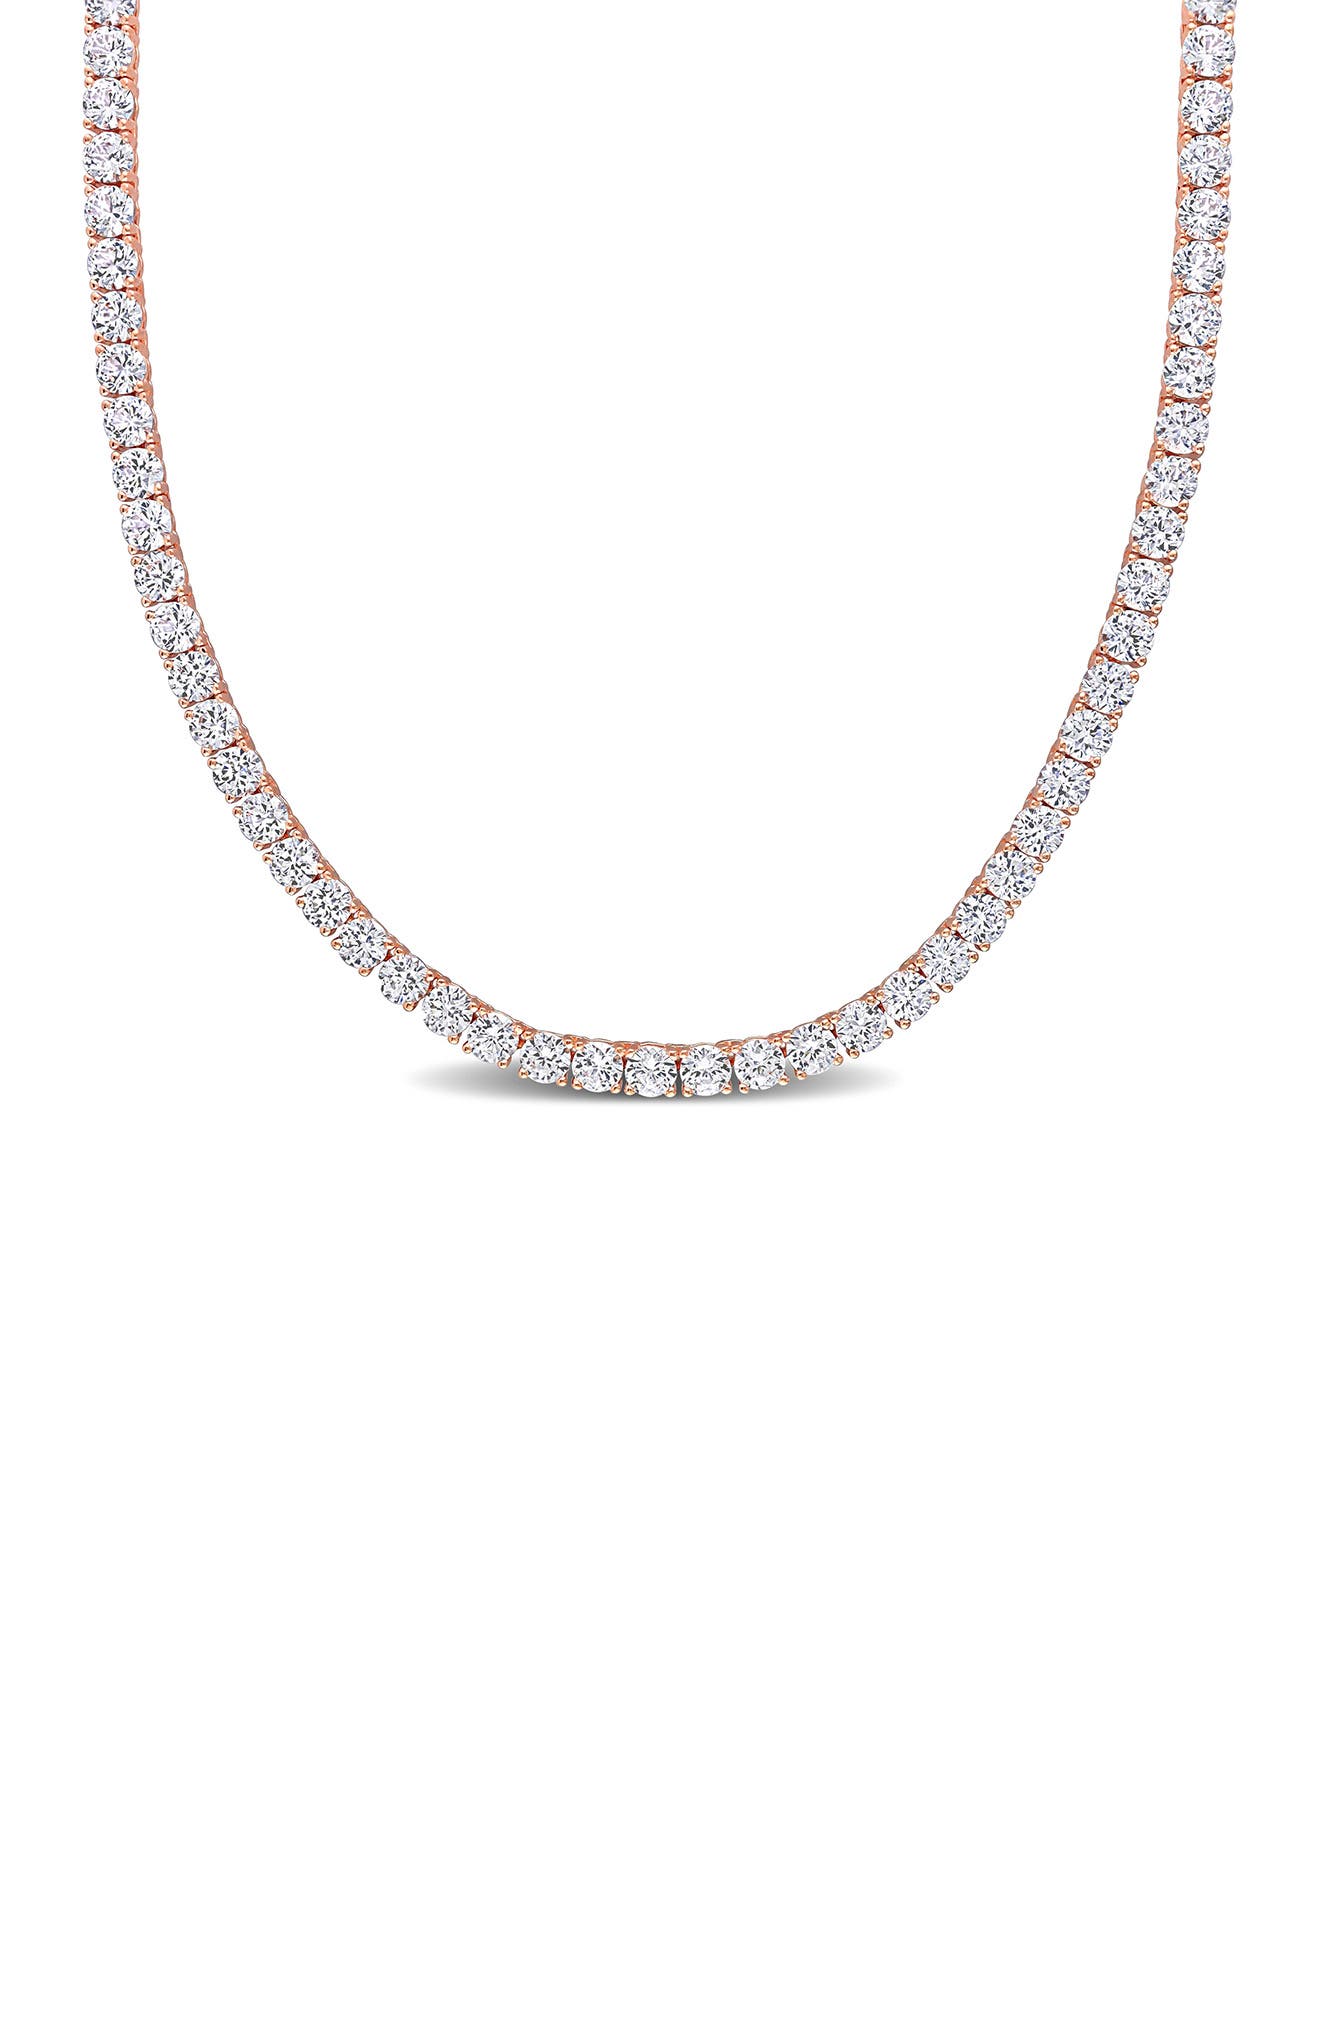 PriceRock SS White Ice Gold-Plated Diamond Necklace 18 Inches Long